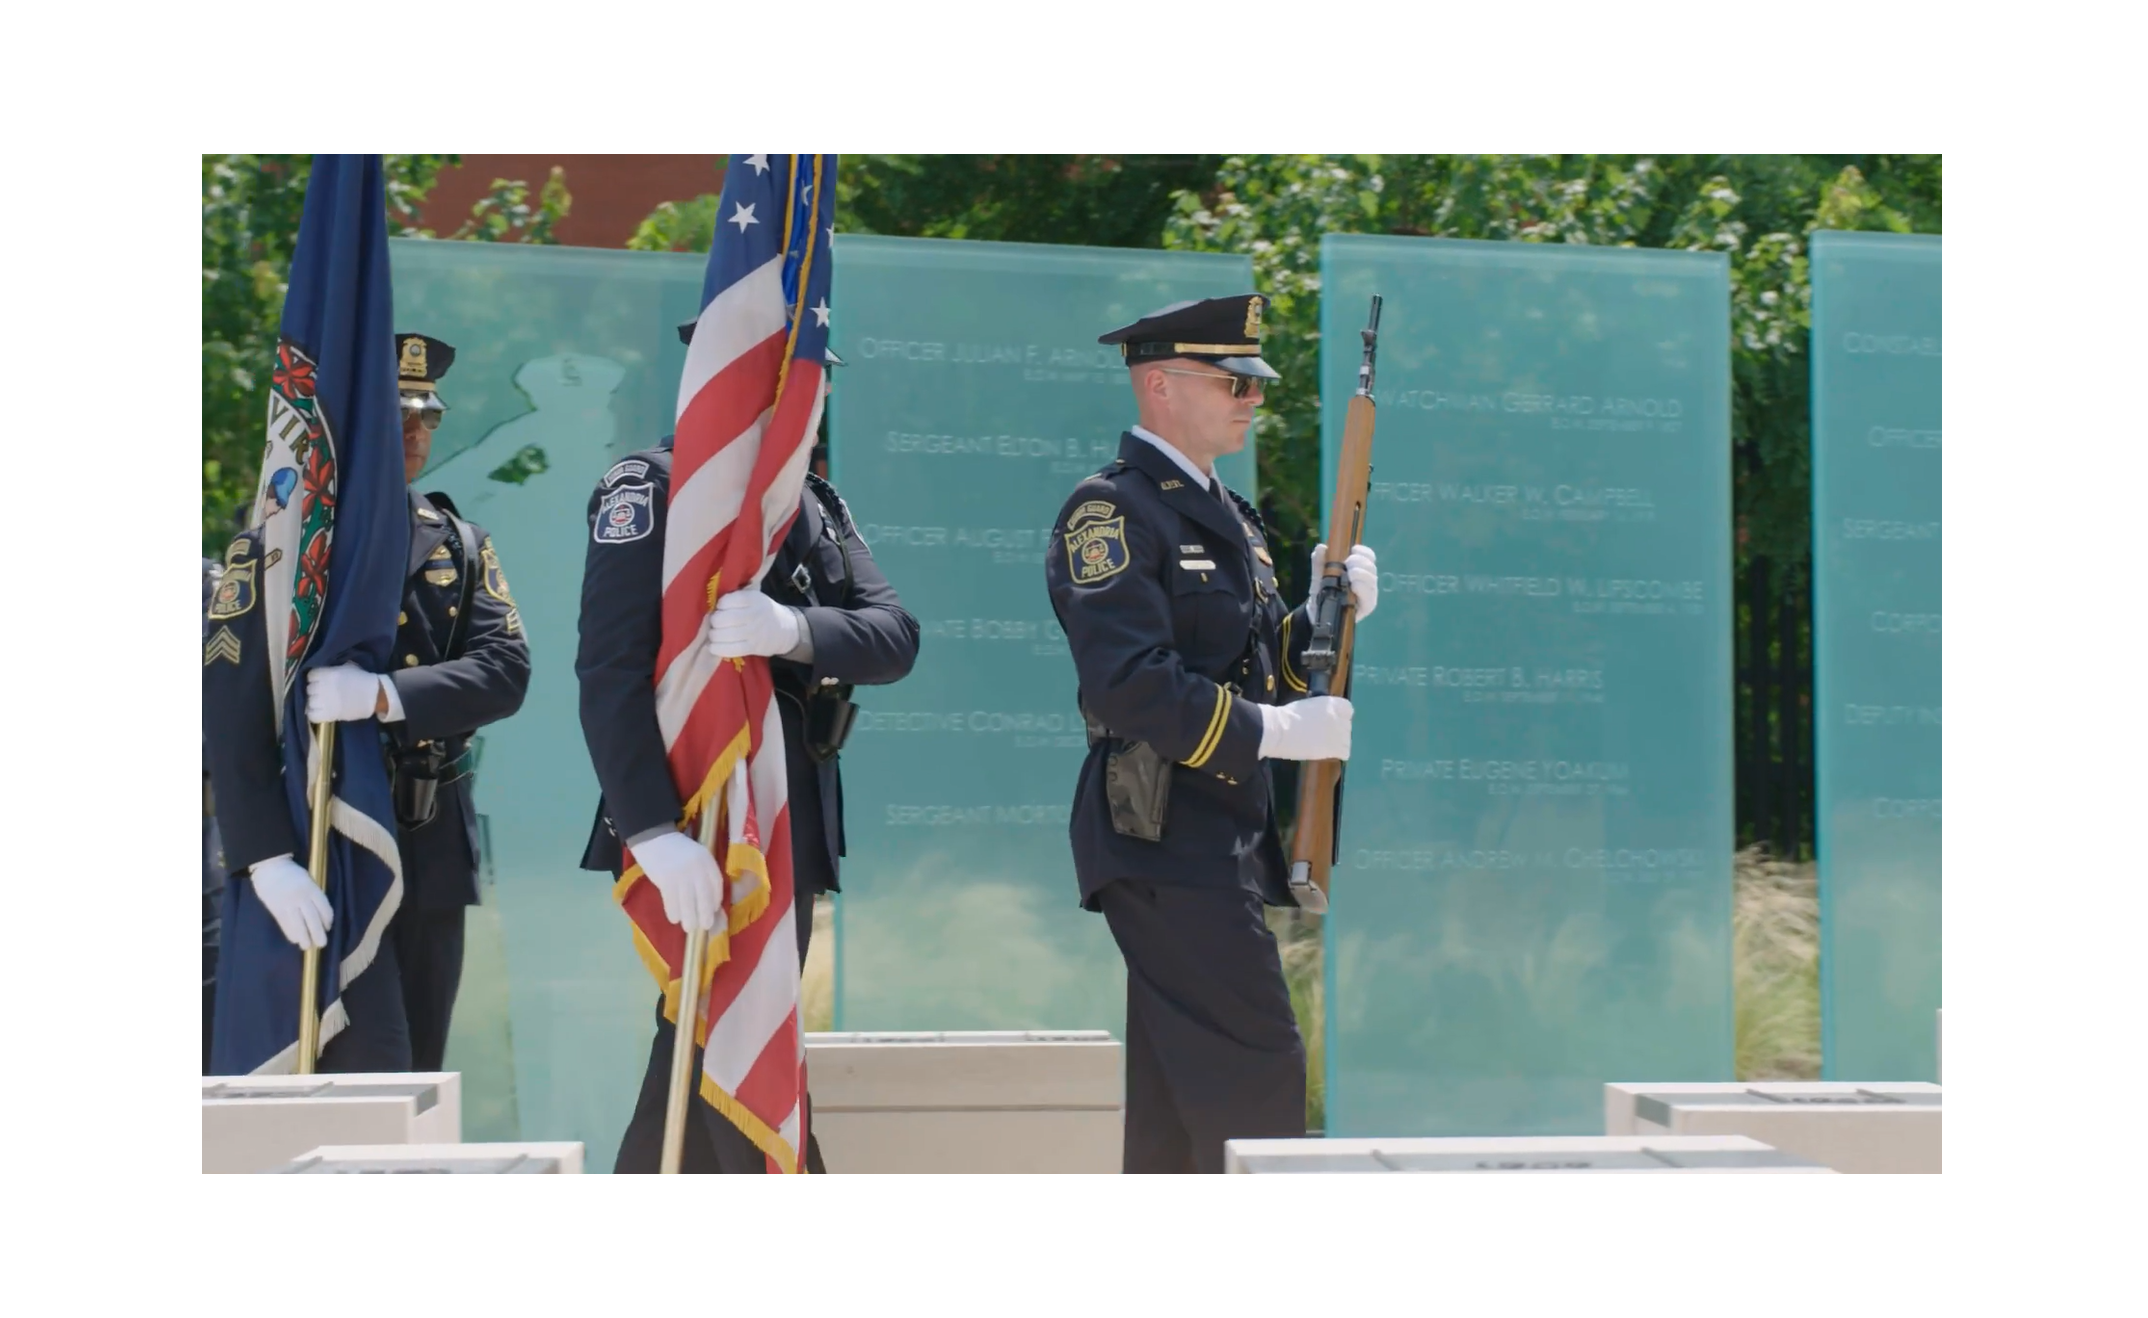 Members of the honor guard parade past the American flag